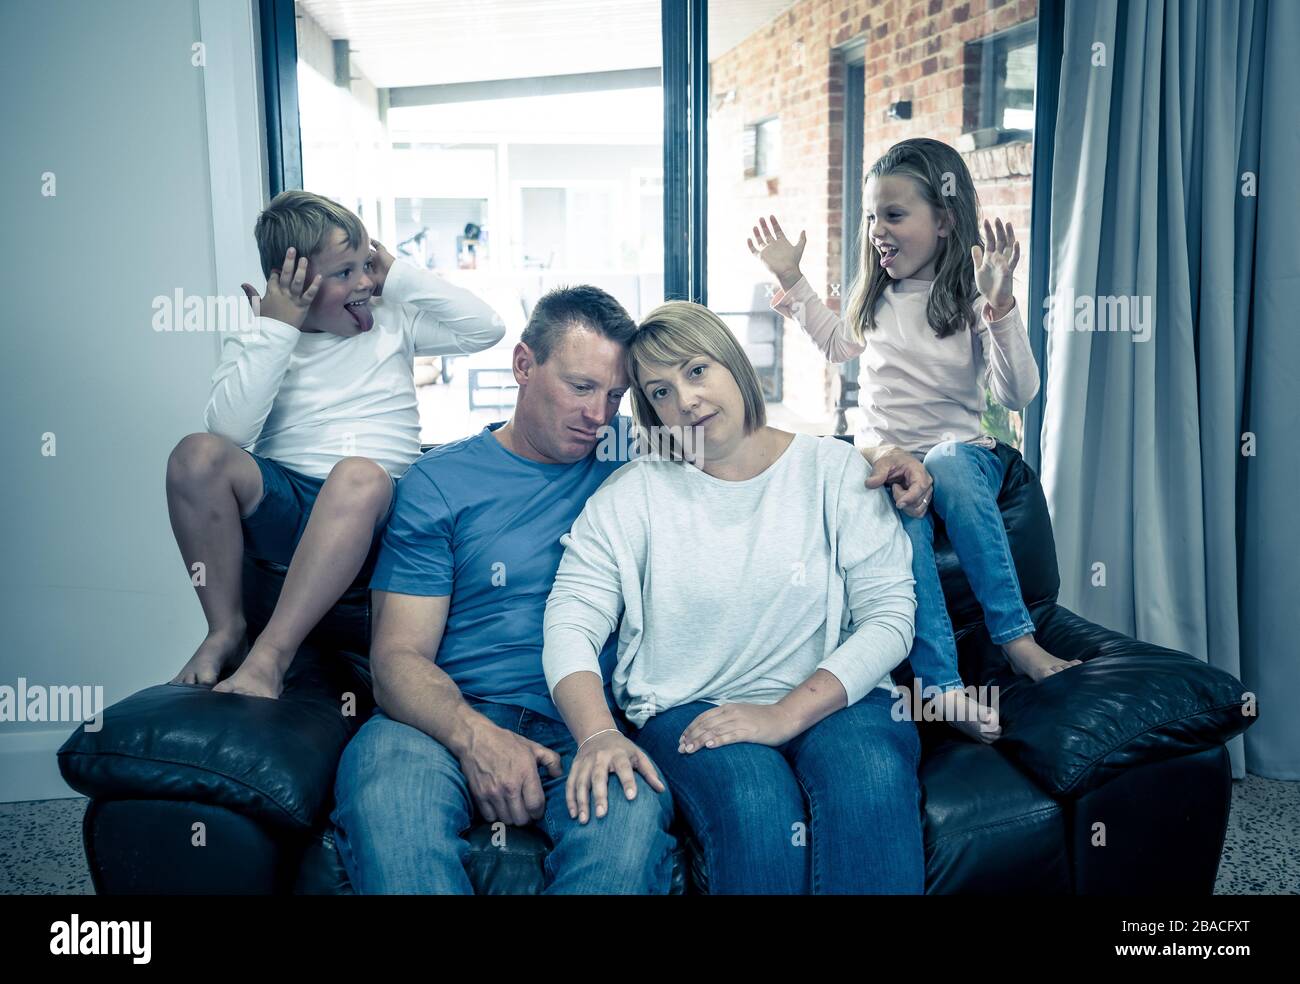 Stressed out parents struggling with having the children at home during Coronavirus self-isolation. Mother and father trying to cope with anxious kids Stock Photo